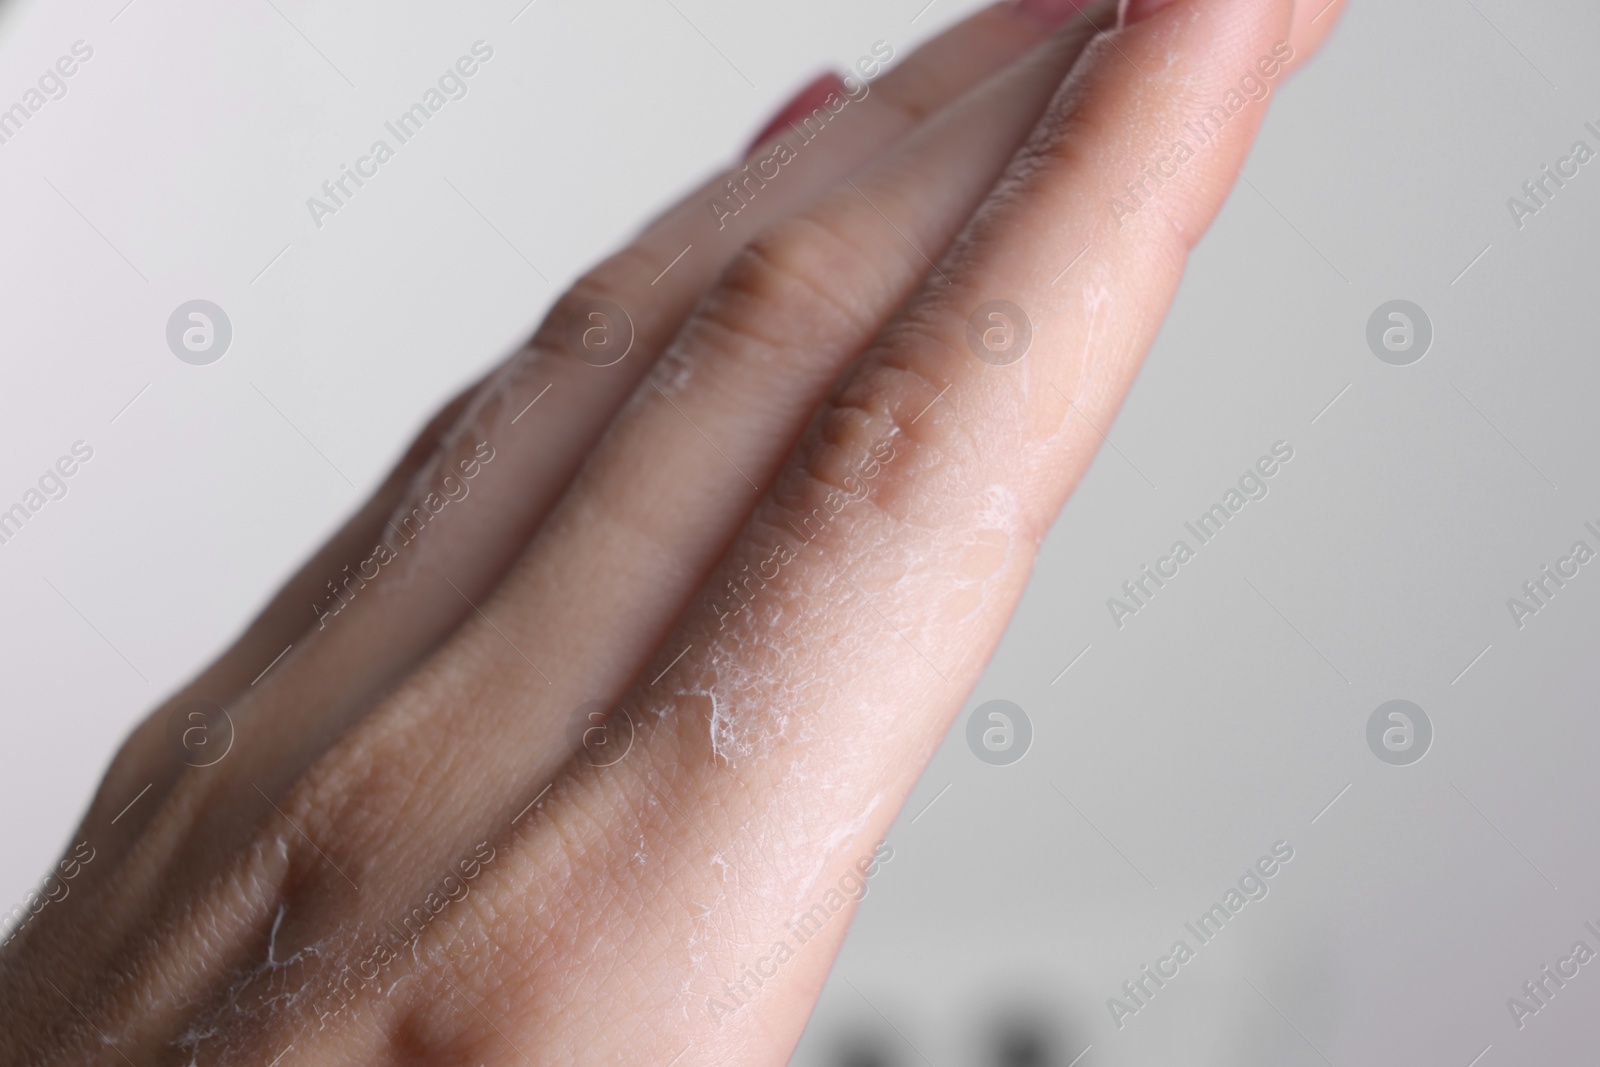 Photo of Woman with dry skin on hand against light background, macro view